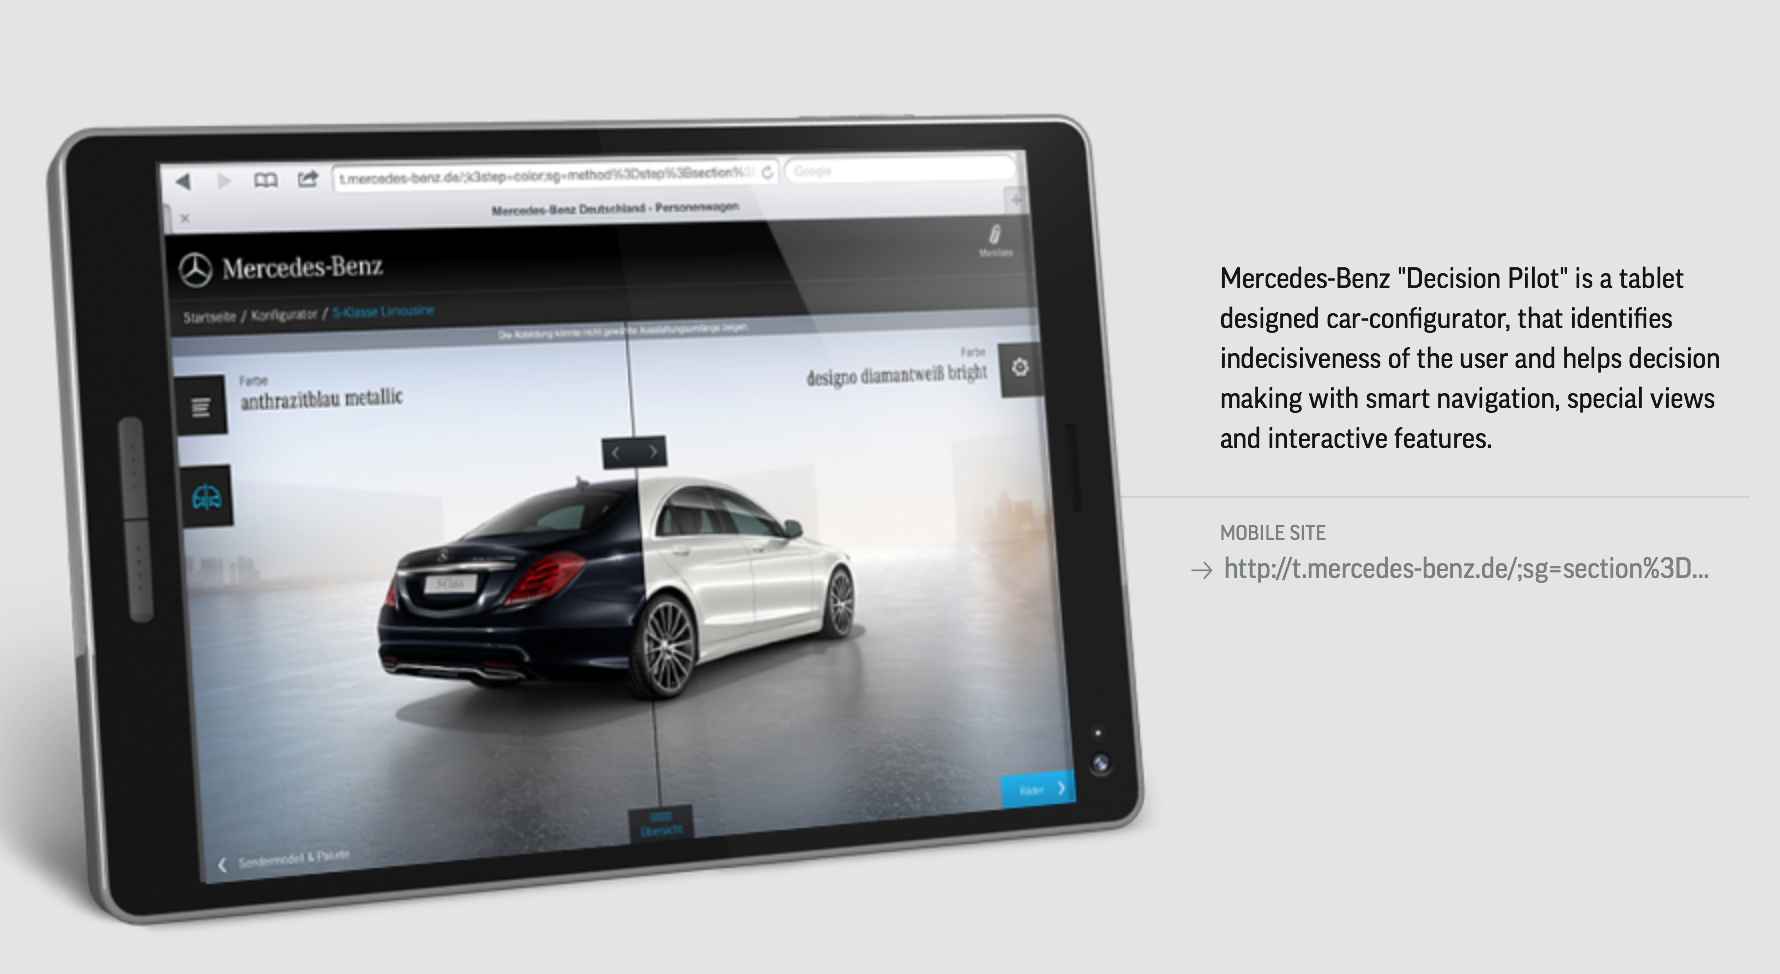 Mercedes-Benz Decision Pilot - MOBILE OF THE DAY by The FWA